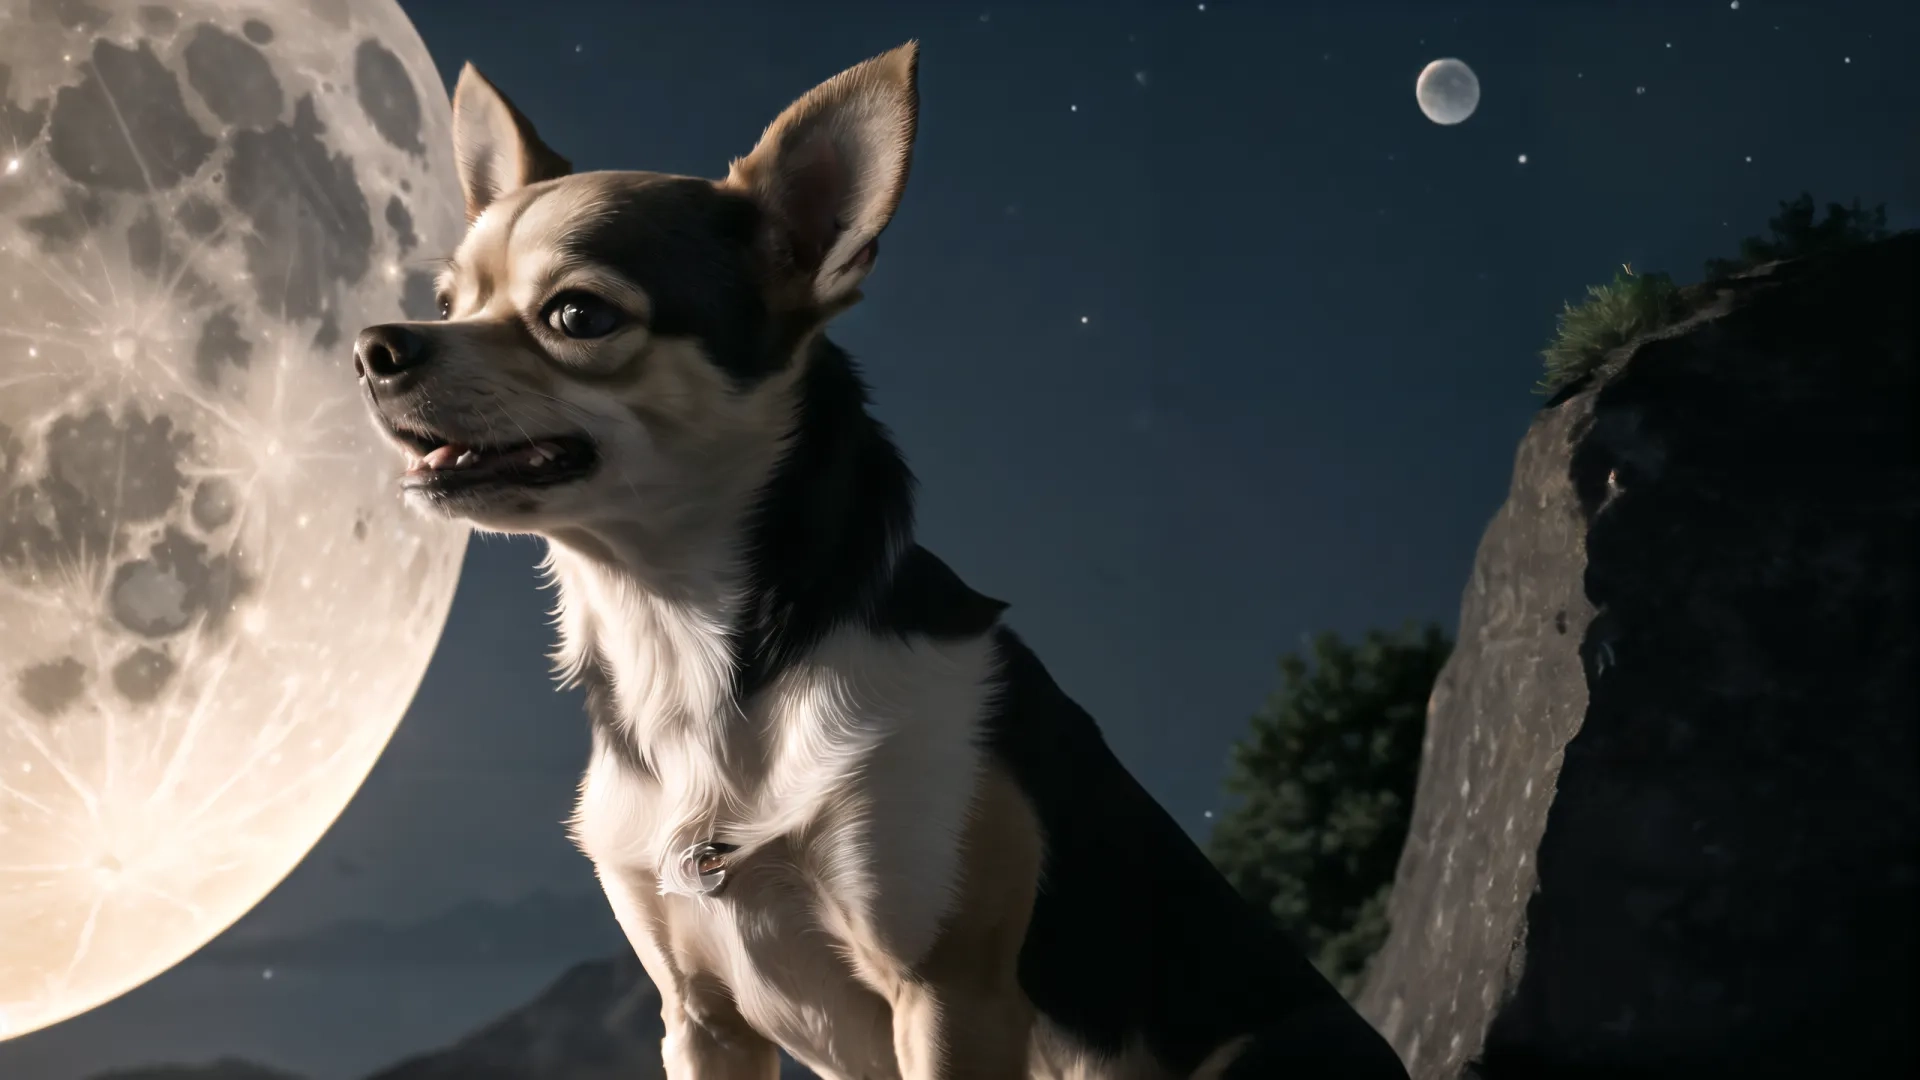 a black and white dog standing in front of a moon next to trees, and rocks and trees are also seen in the background and full moon at night sky
